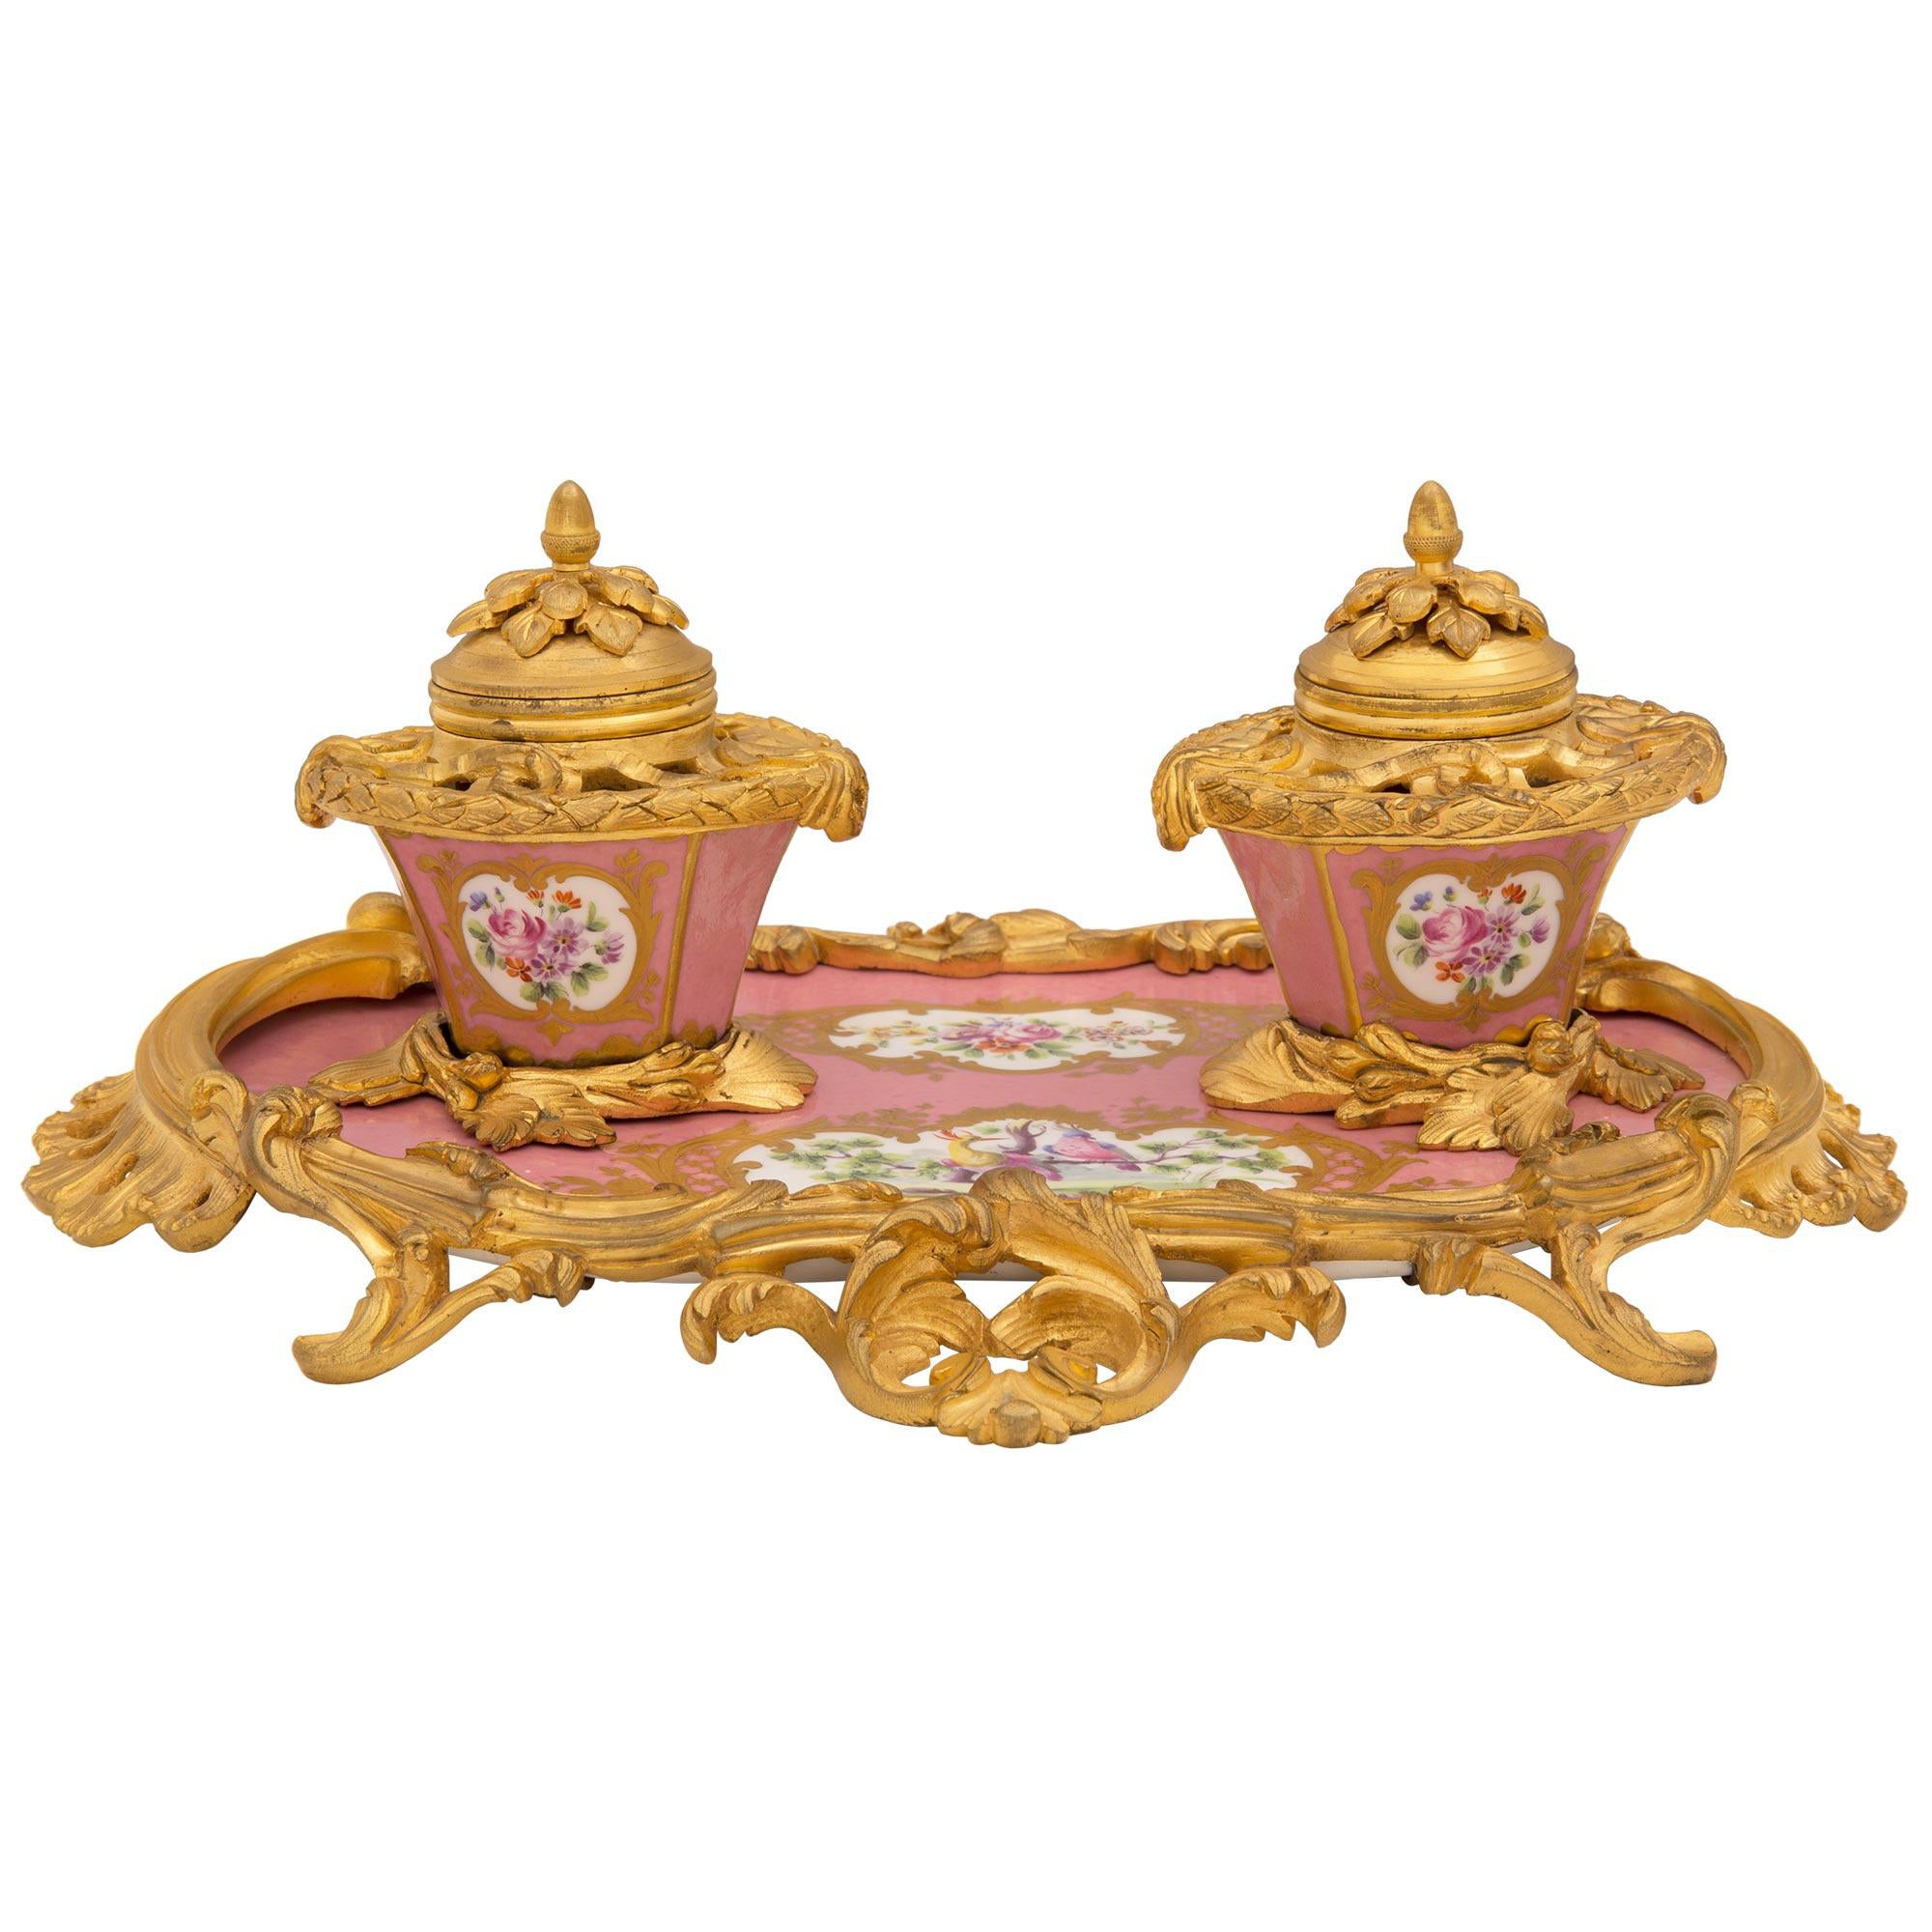  French Early 19th Century Louis XV St. Sèvres Porcelain and Ormolu Inkwell